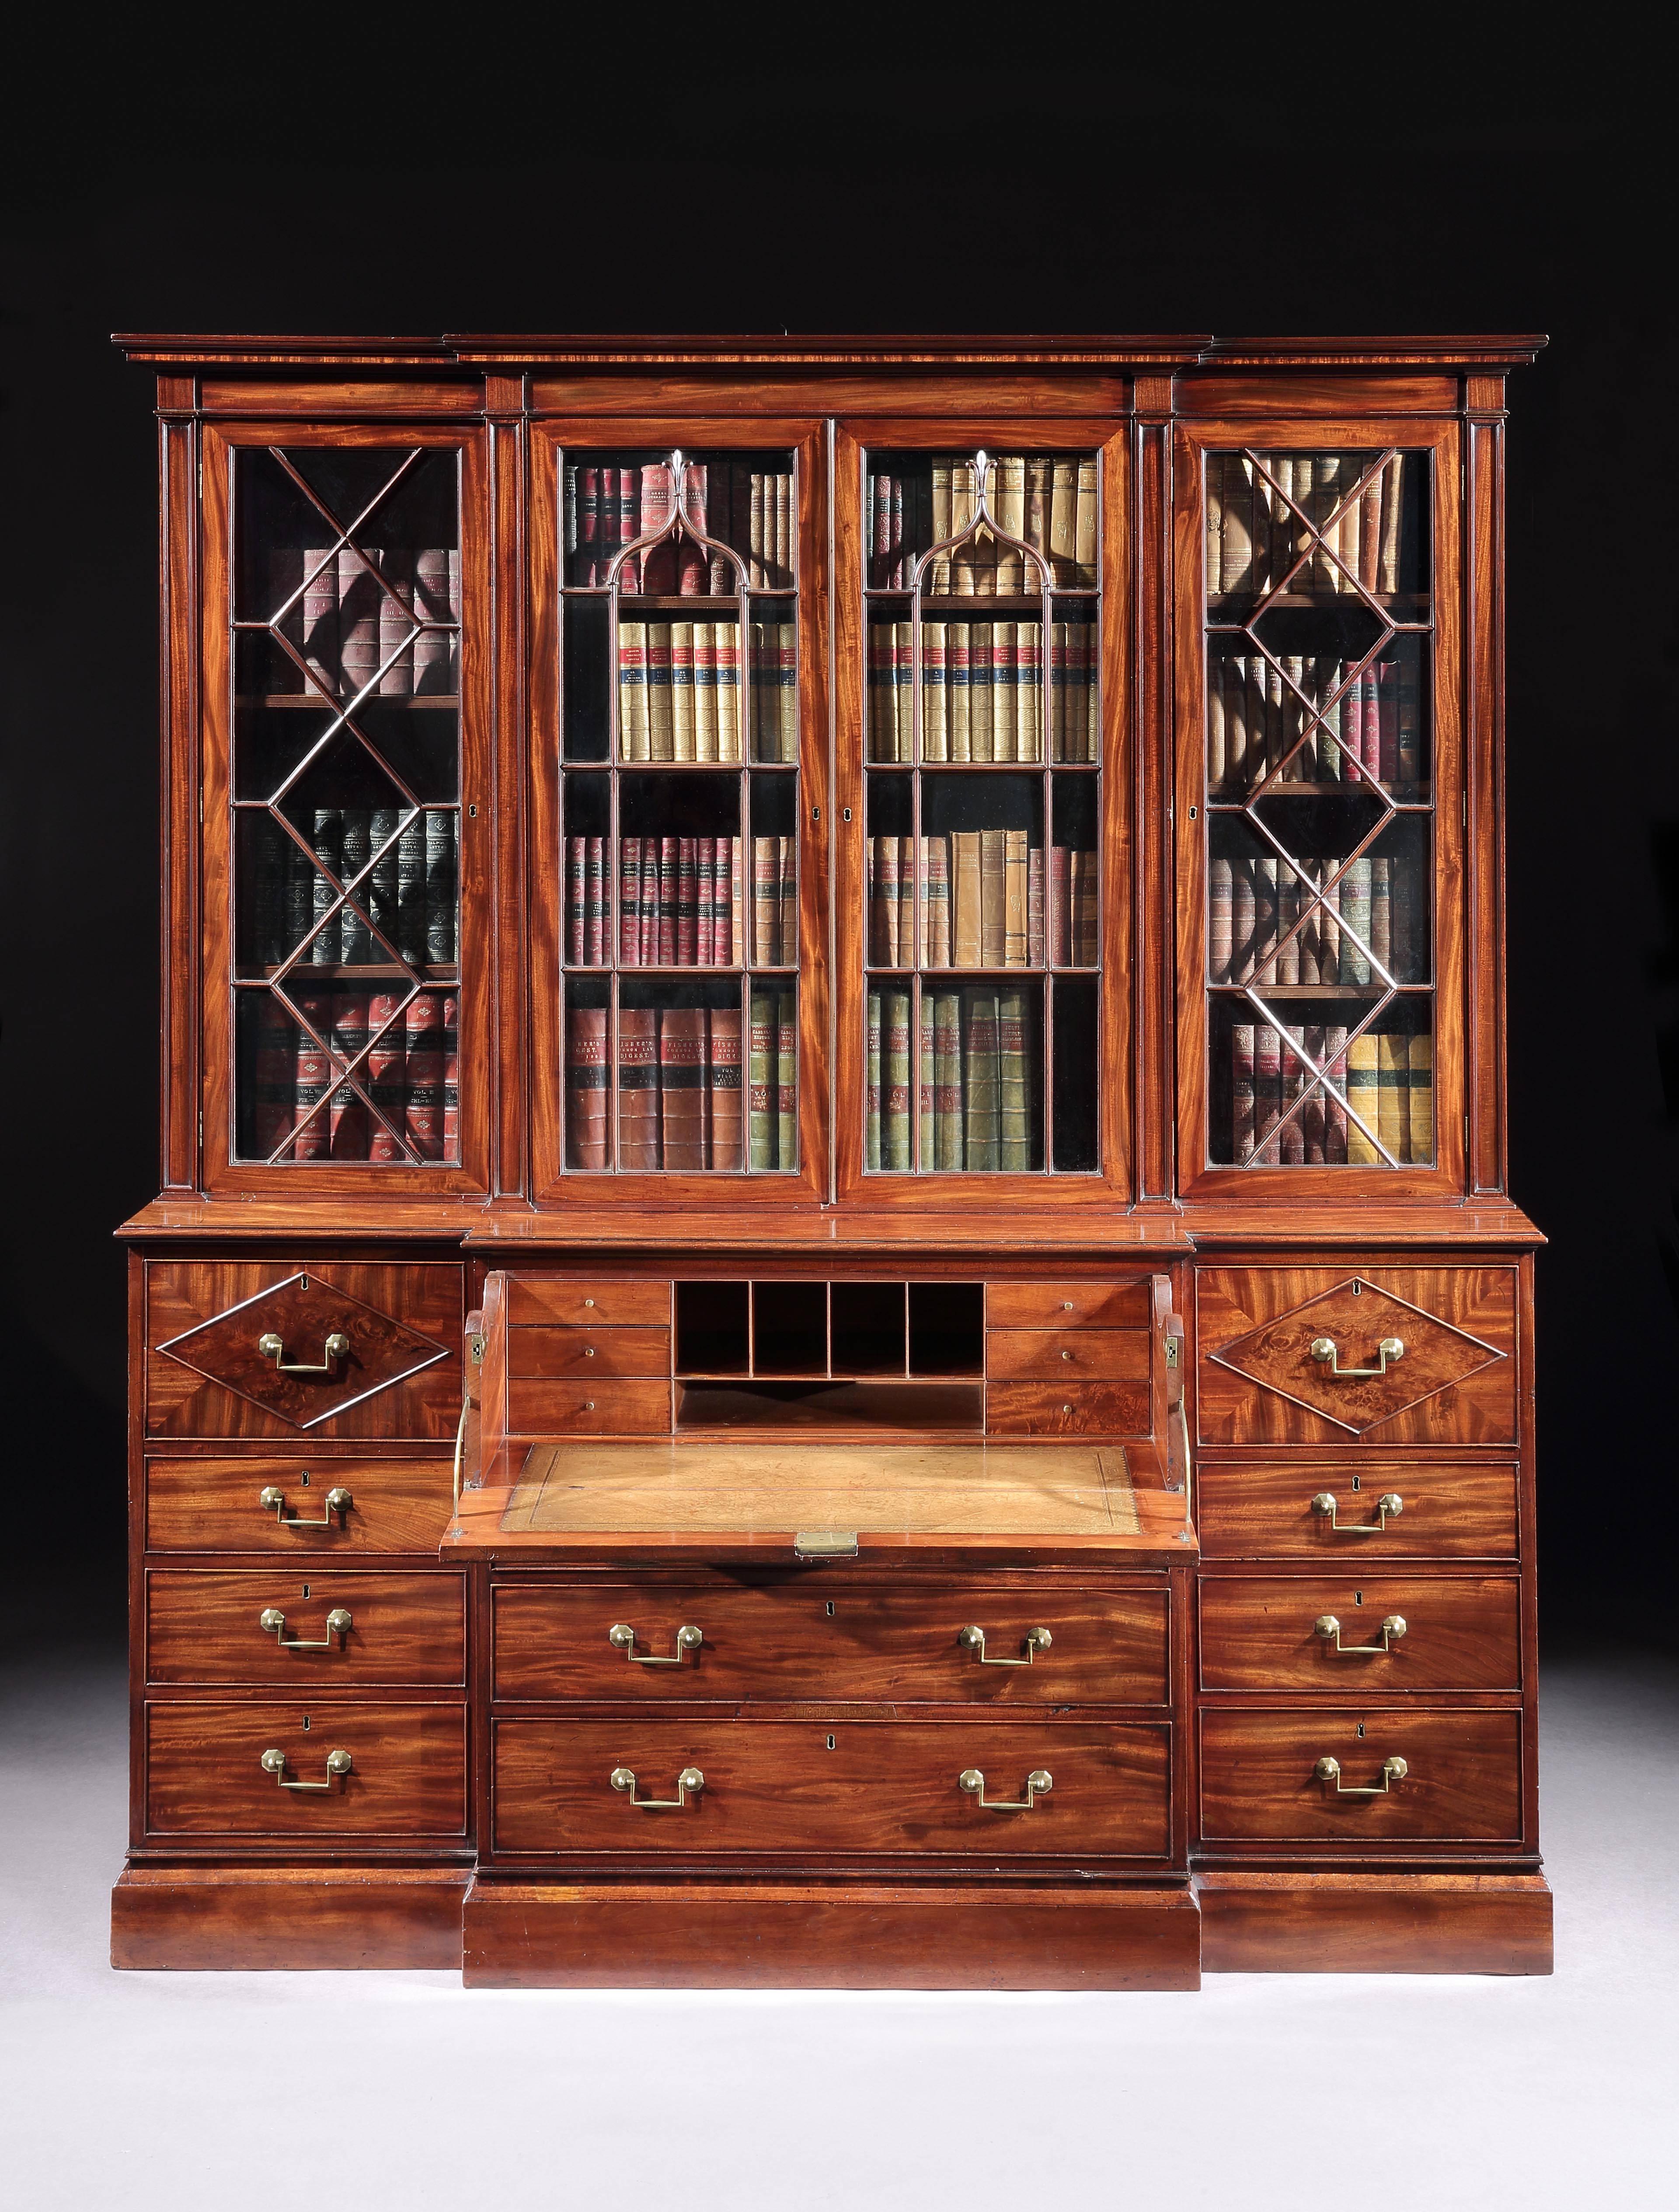 Of unusually small size and under six feet wide, this George III breakfront bookcase with a fitted secretaire interior, is original throughout. It has a label showing that it was the property of Lord Teignmouth who was the first Governor General of